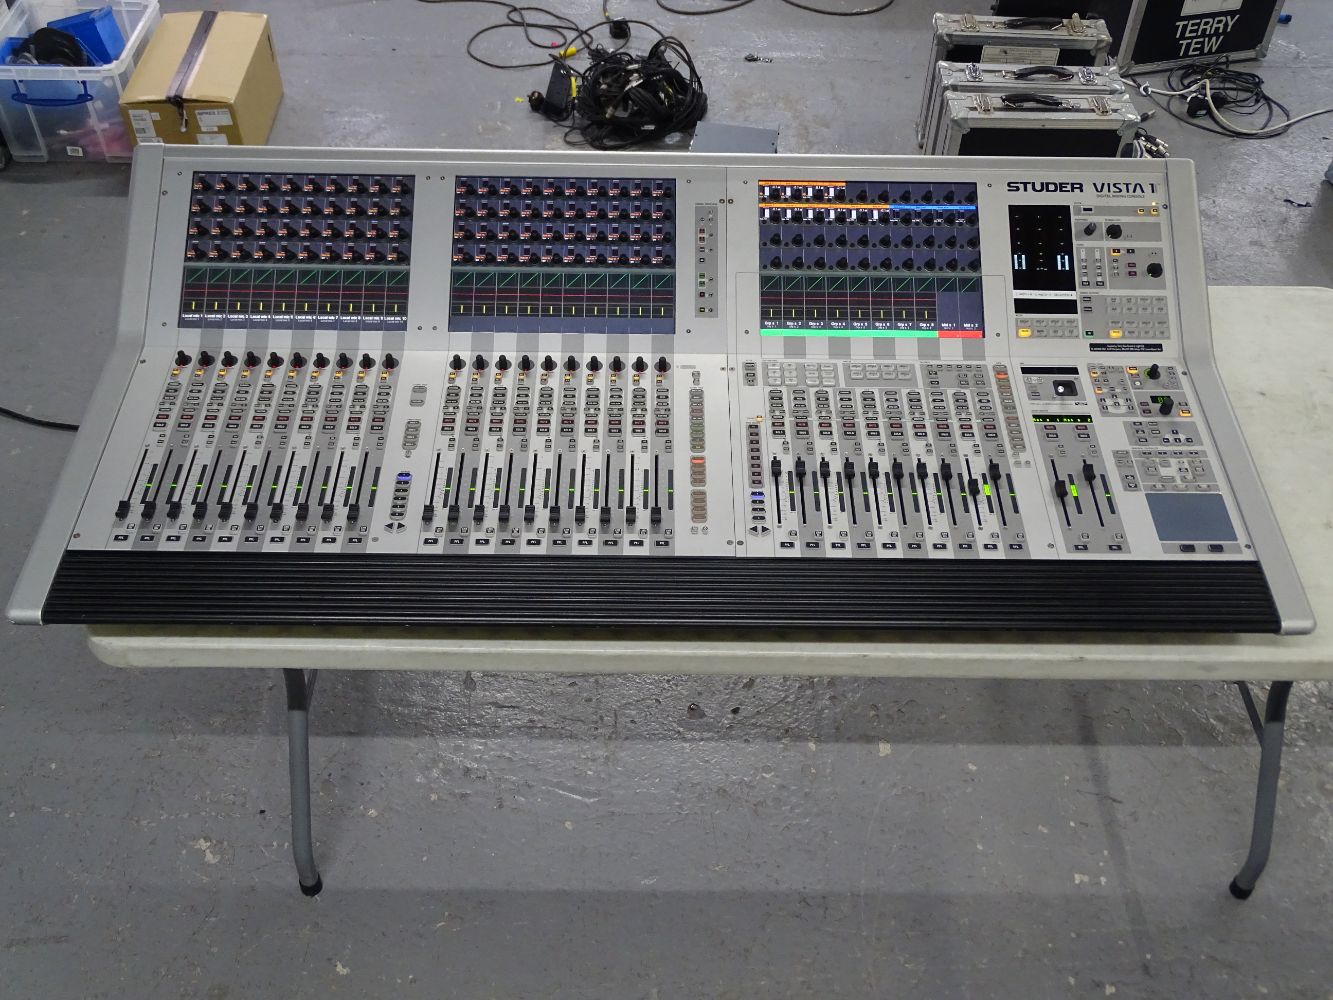 COLLECTIVE AUCTION OF AUDIO-VISUAL EQUIPMENT